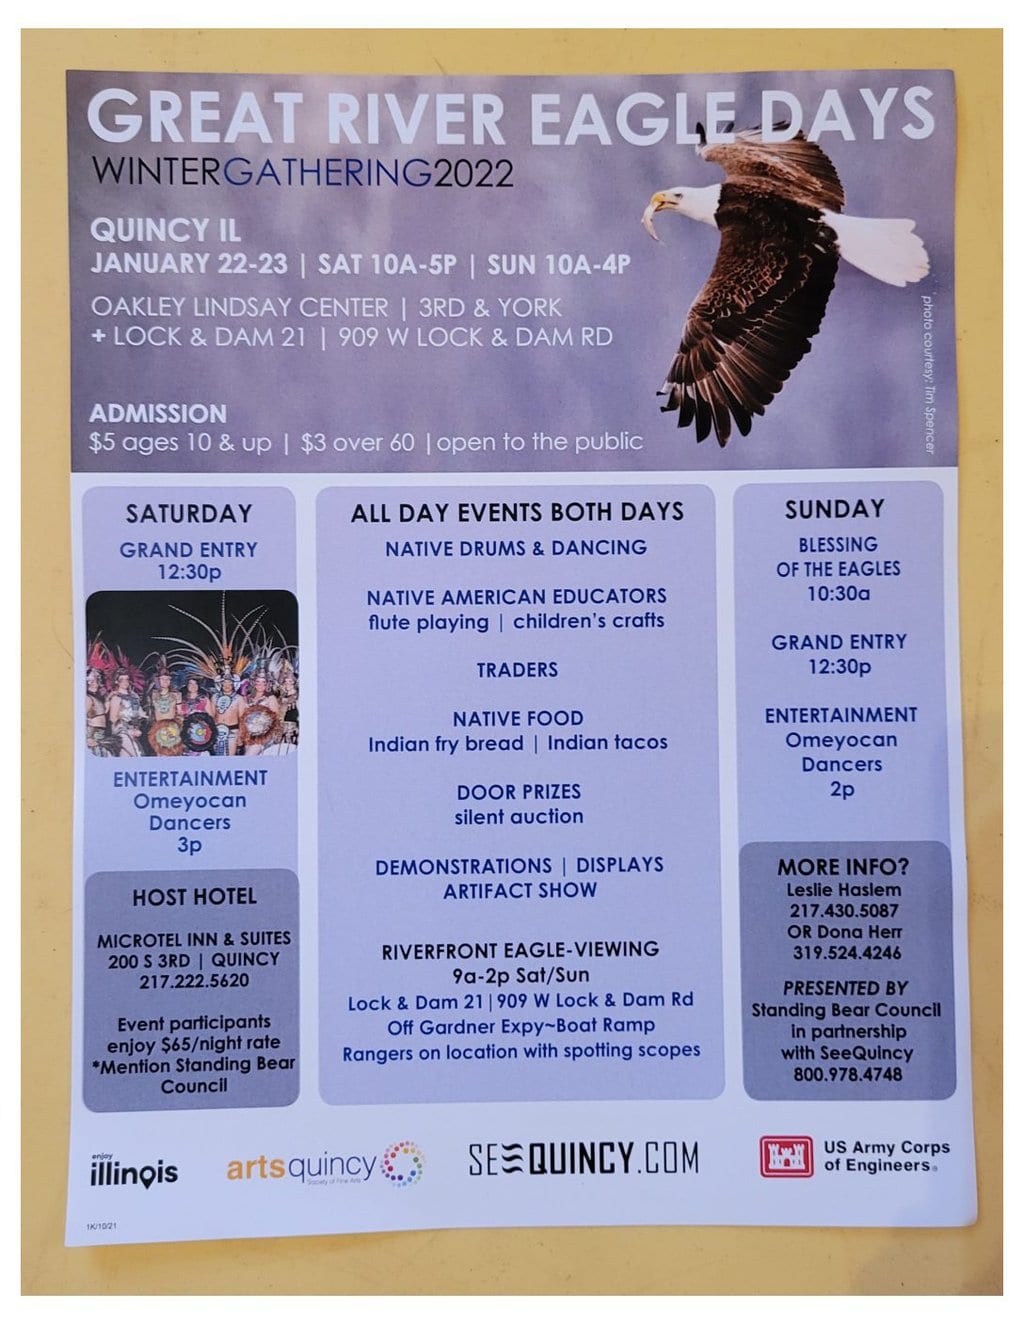 Great River Eagle Days Winter Gathering 2022